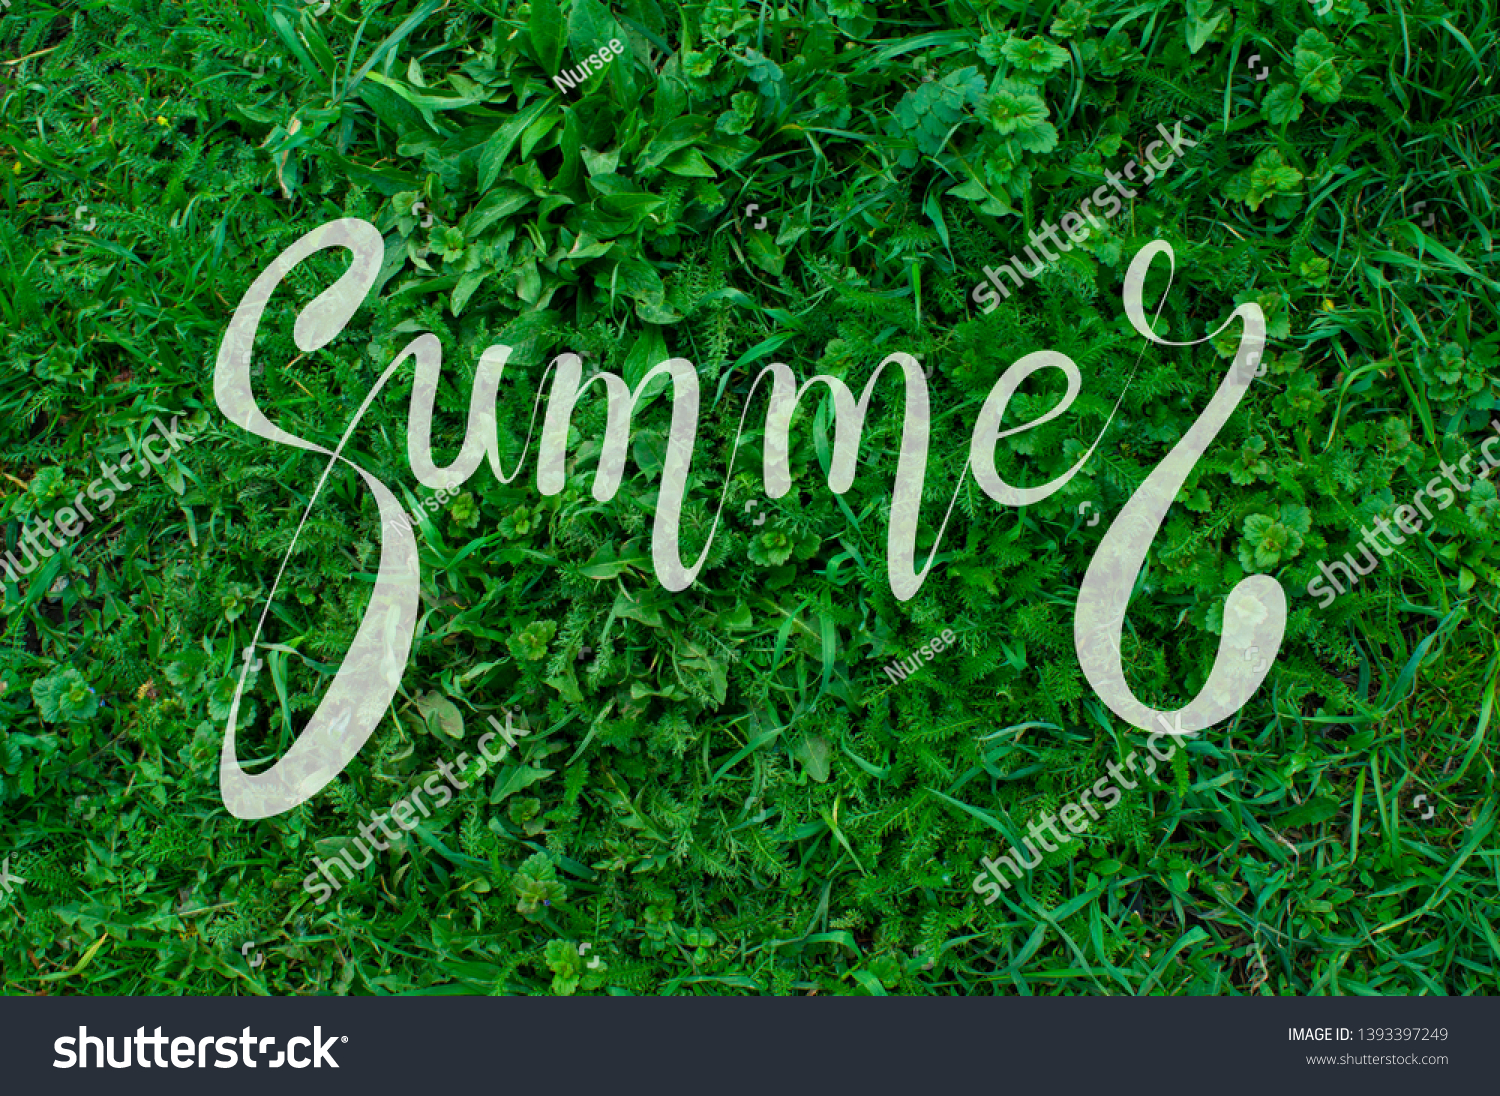 
Bright background with green lawn, grass with lettering calligraphic lettering summer white color. #1393397249